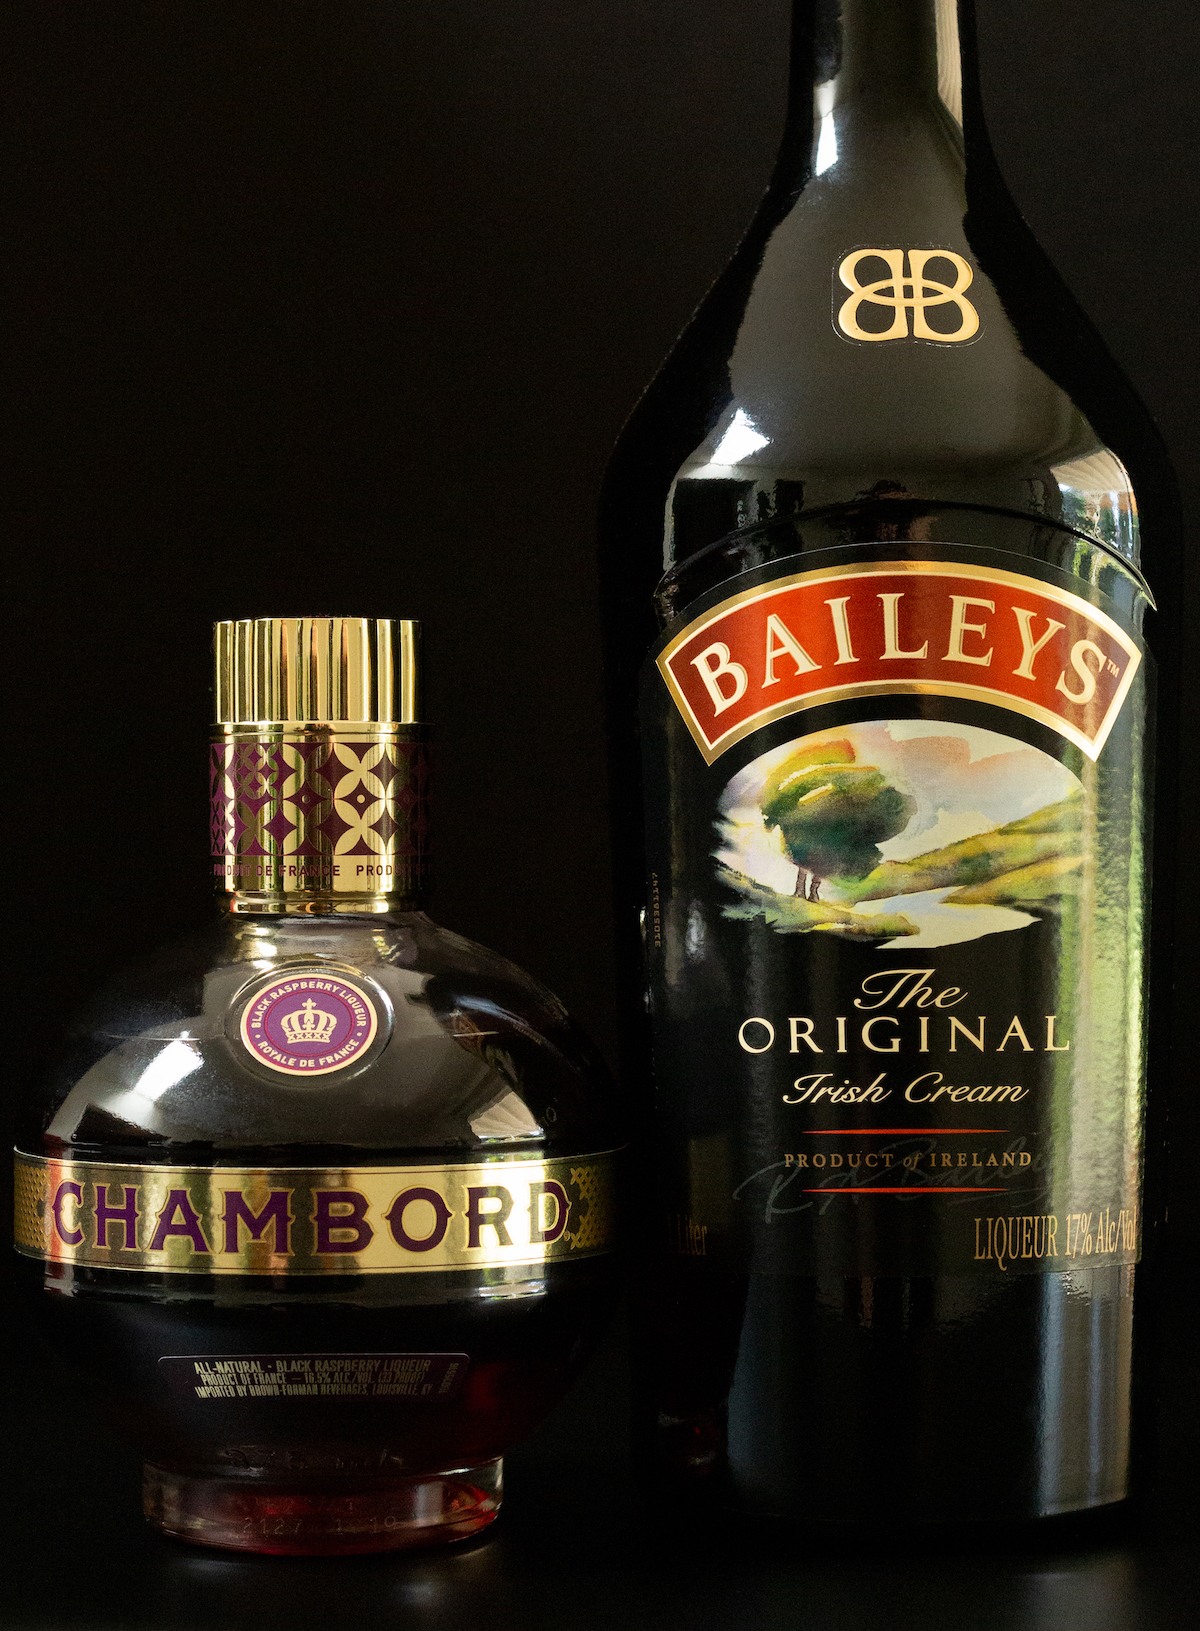 A bottle of Chambord and a bottle of Bailey's Irish Cream on a black background.